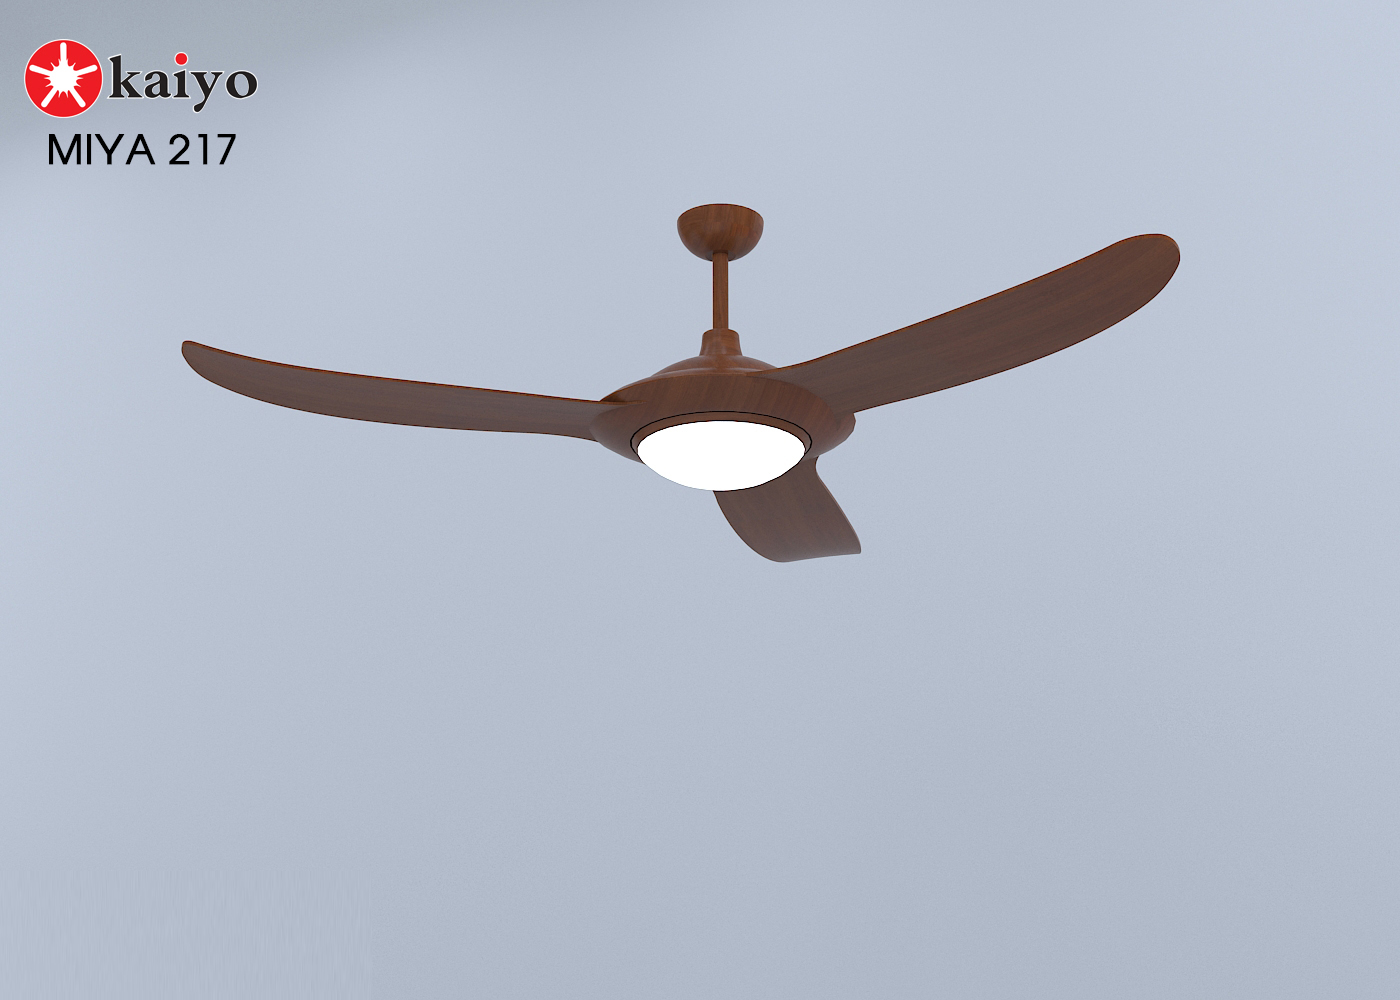 [FILE 3DMAX] Actual models of KaiyoKukan ceiling fans with decorative lights for architects